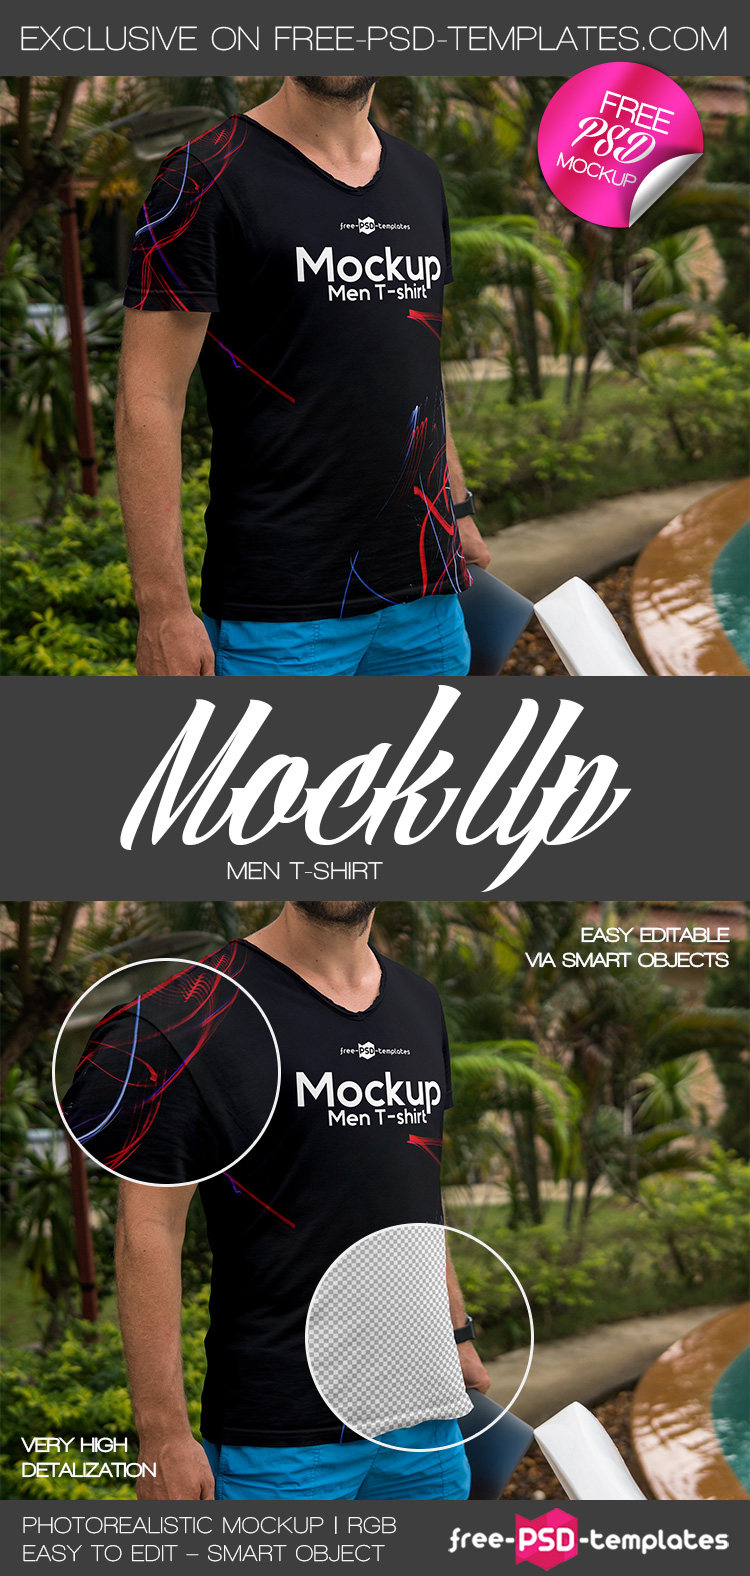 Download Free Men T-shirt Mock-up in PSD | Free PSD Templates